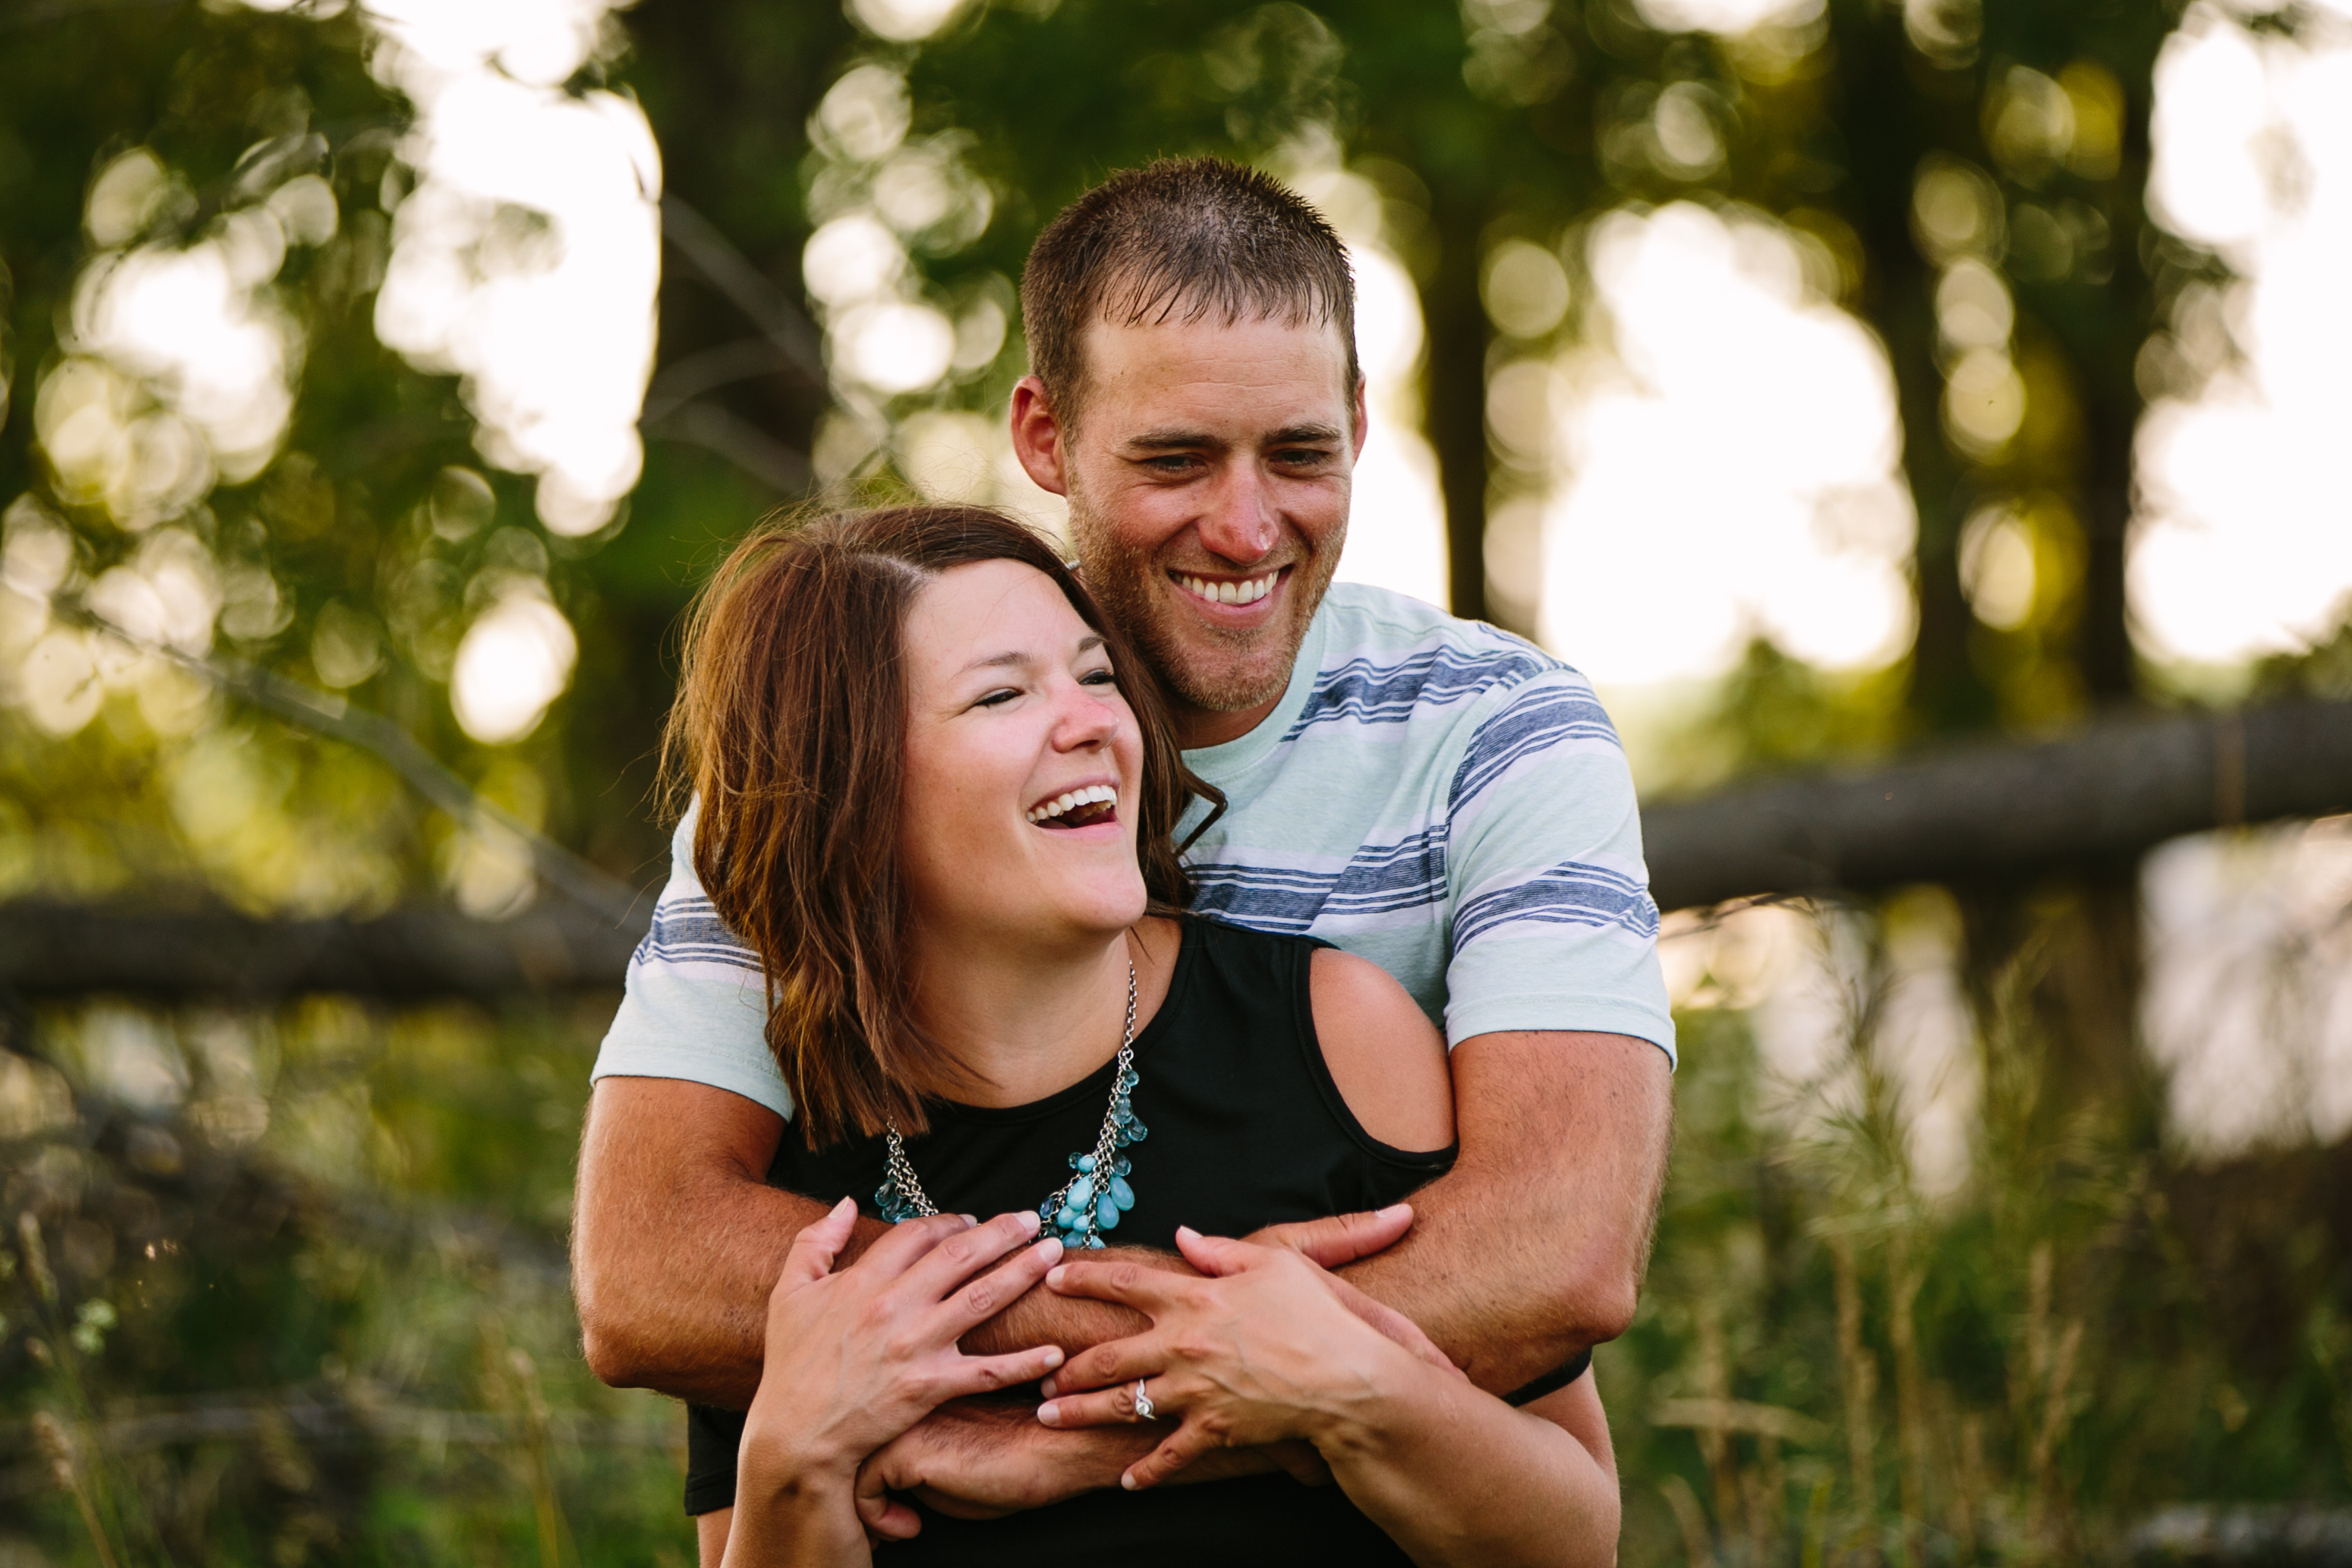 outdoor dubuque engagement session by catherine furlin photography, couple snuggling and laughing